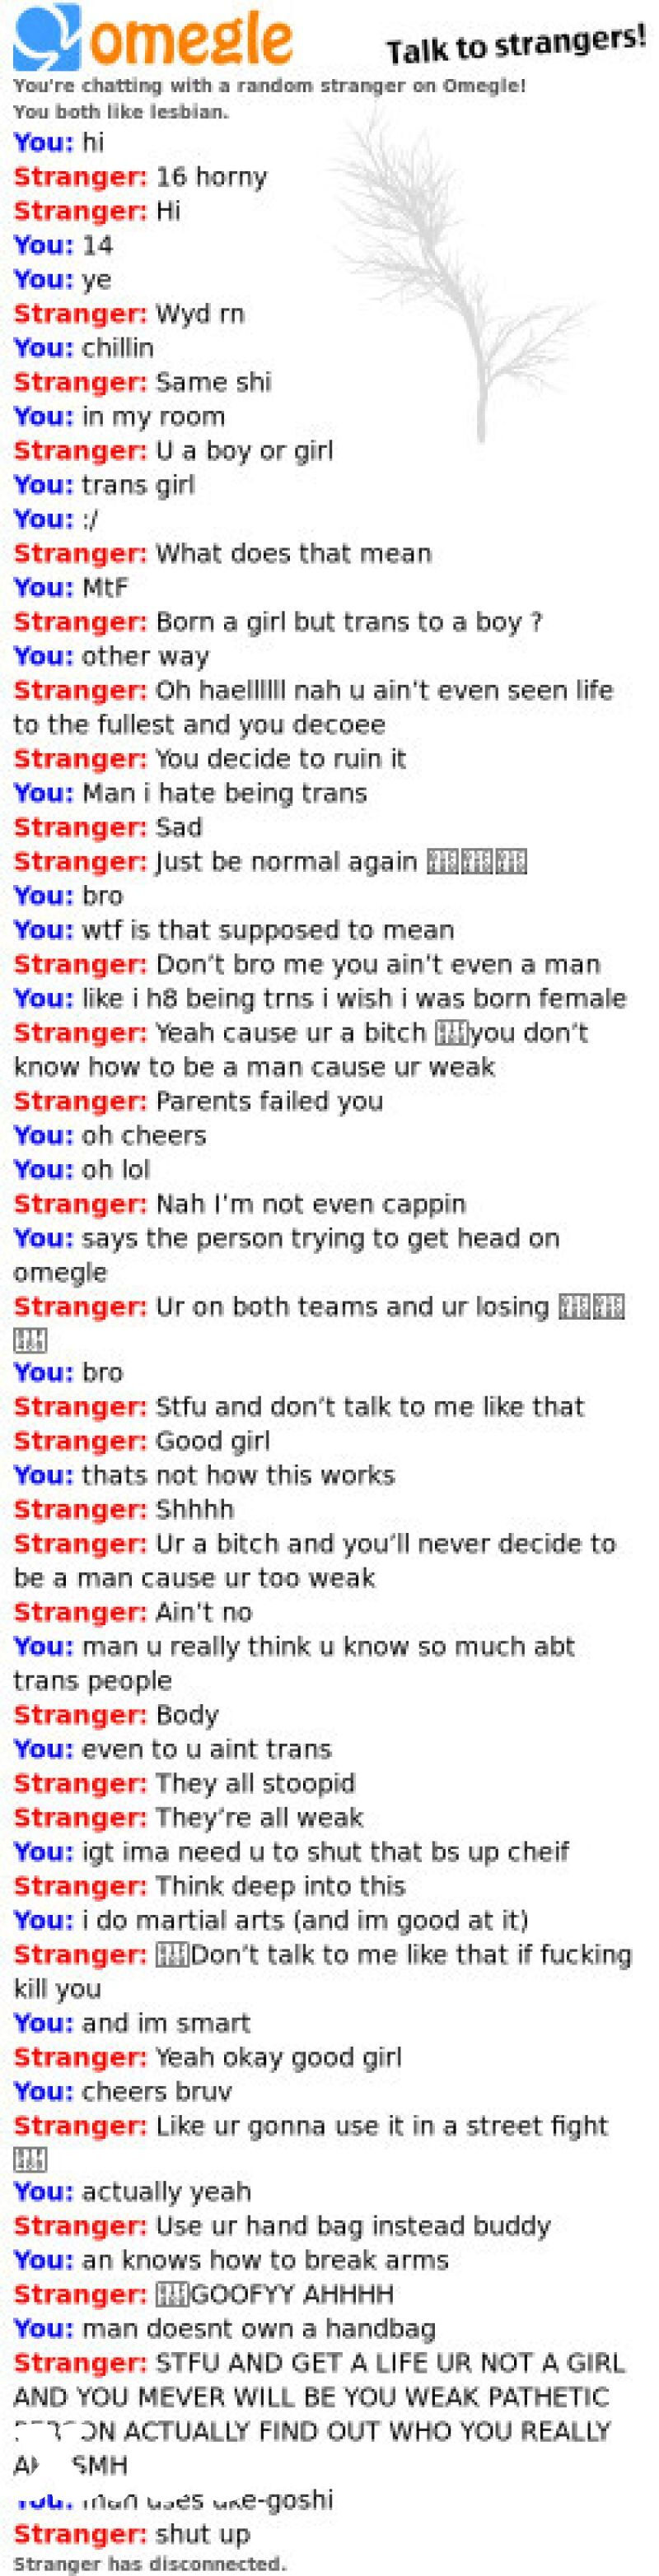 Terfs on omegle pt 2 also bro srsly said id never be a girl and called my a  girl up untill the final 3 messages. from omegle stickam yanmar com sex girl